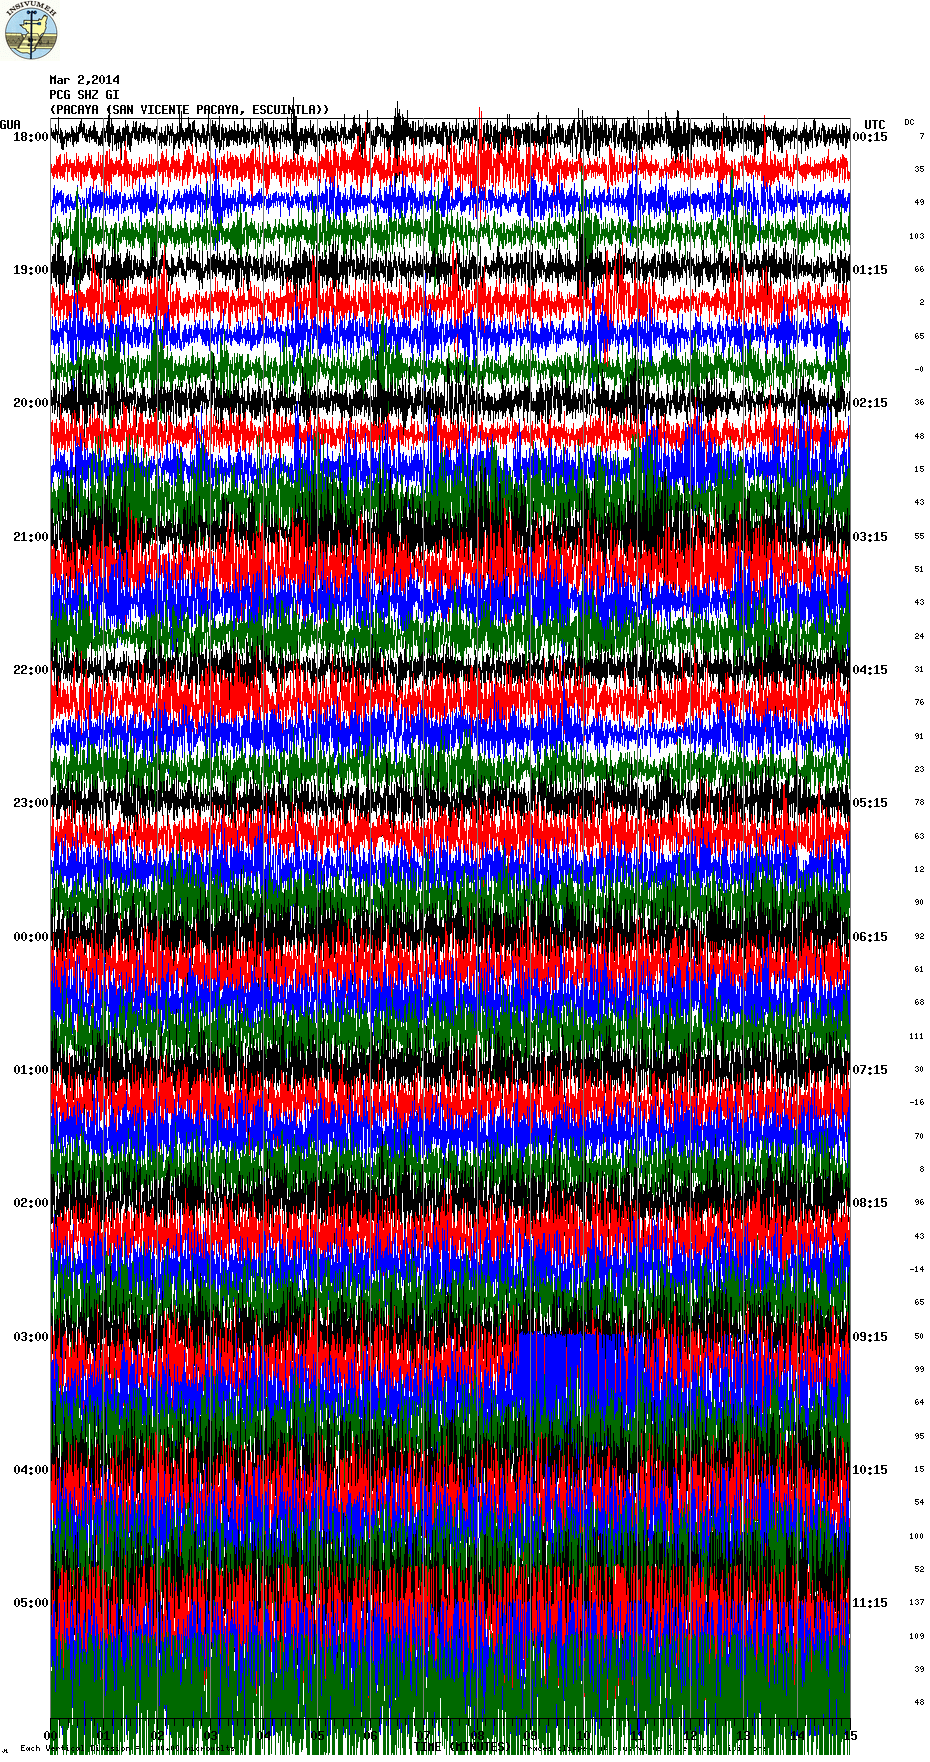 Seismic signal from Pacaya today (PCG station, INSIVUMEH)